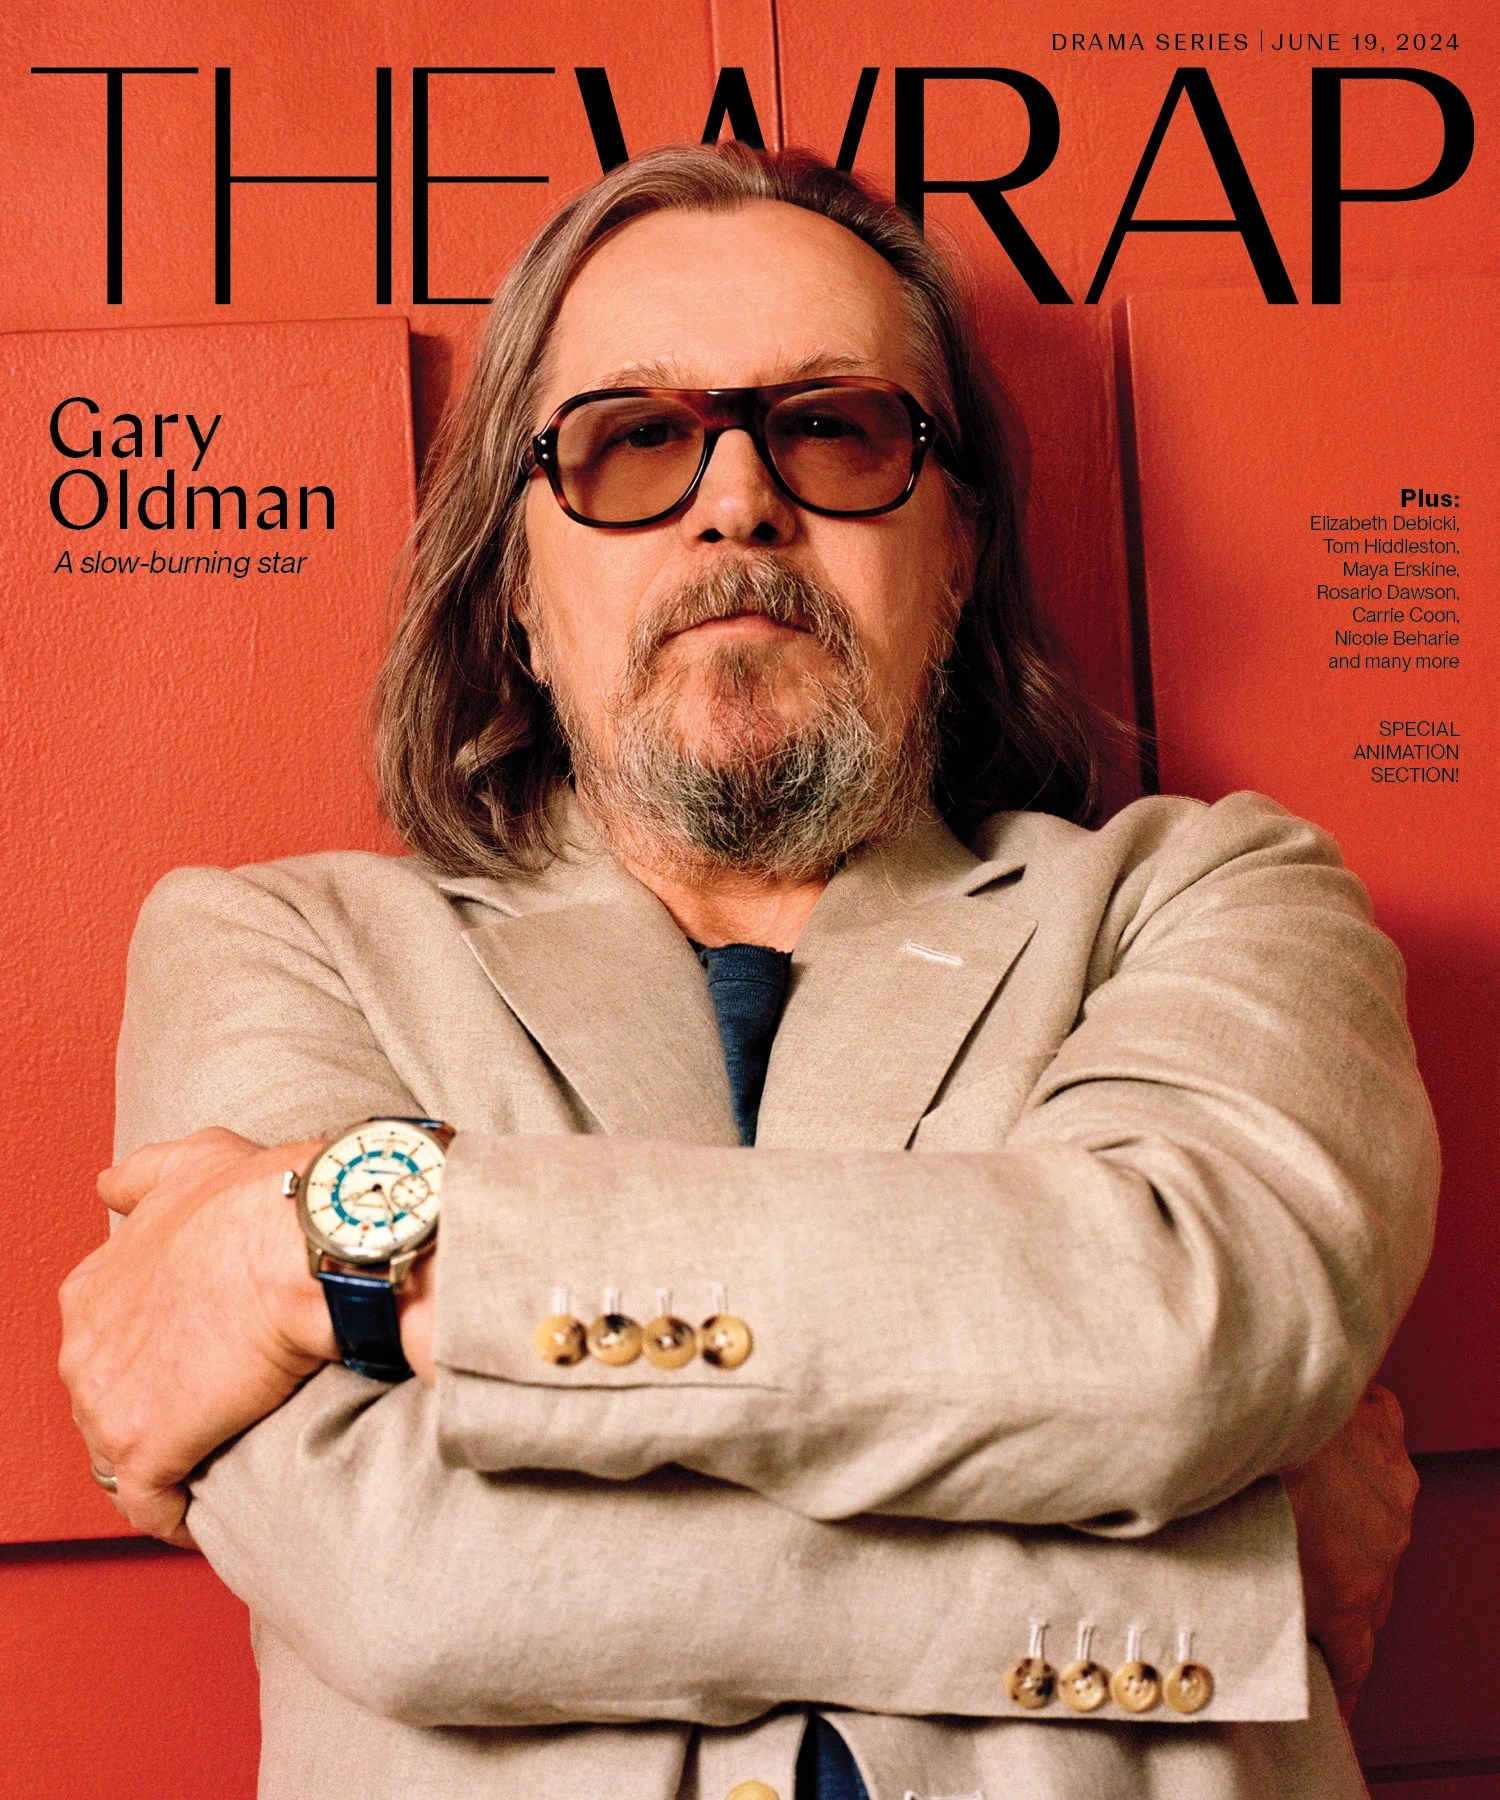 Gary Oldman photographed by Molly Matalon for TheWrap